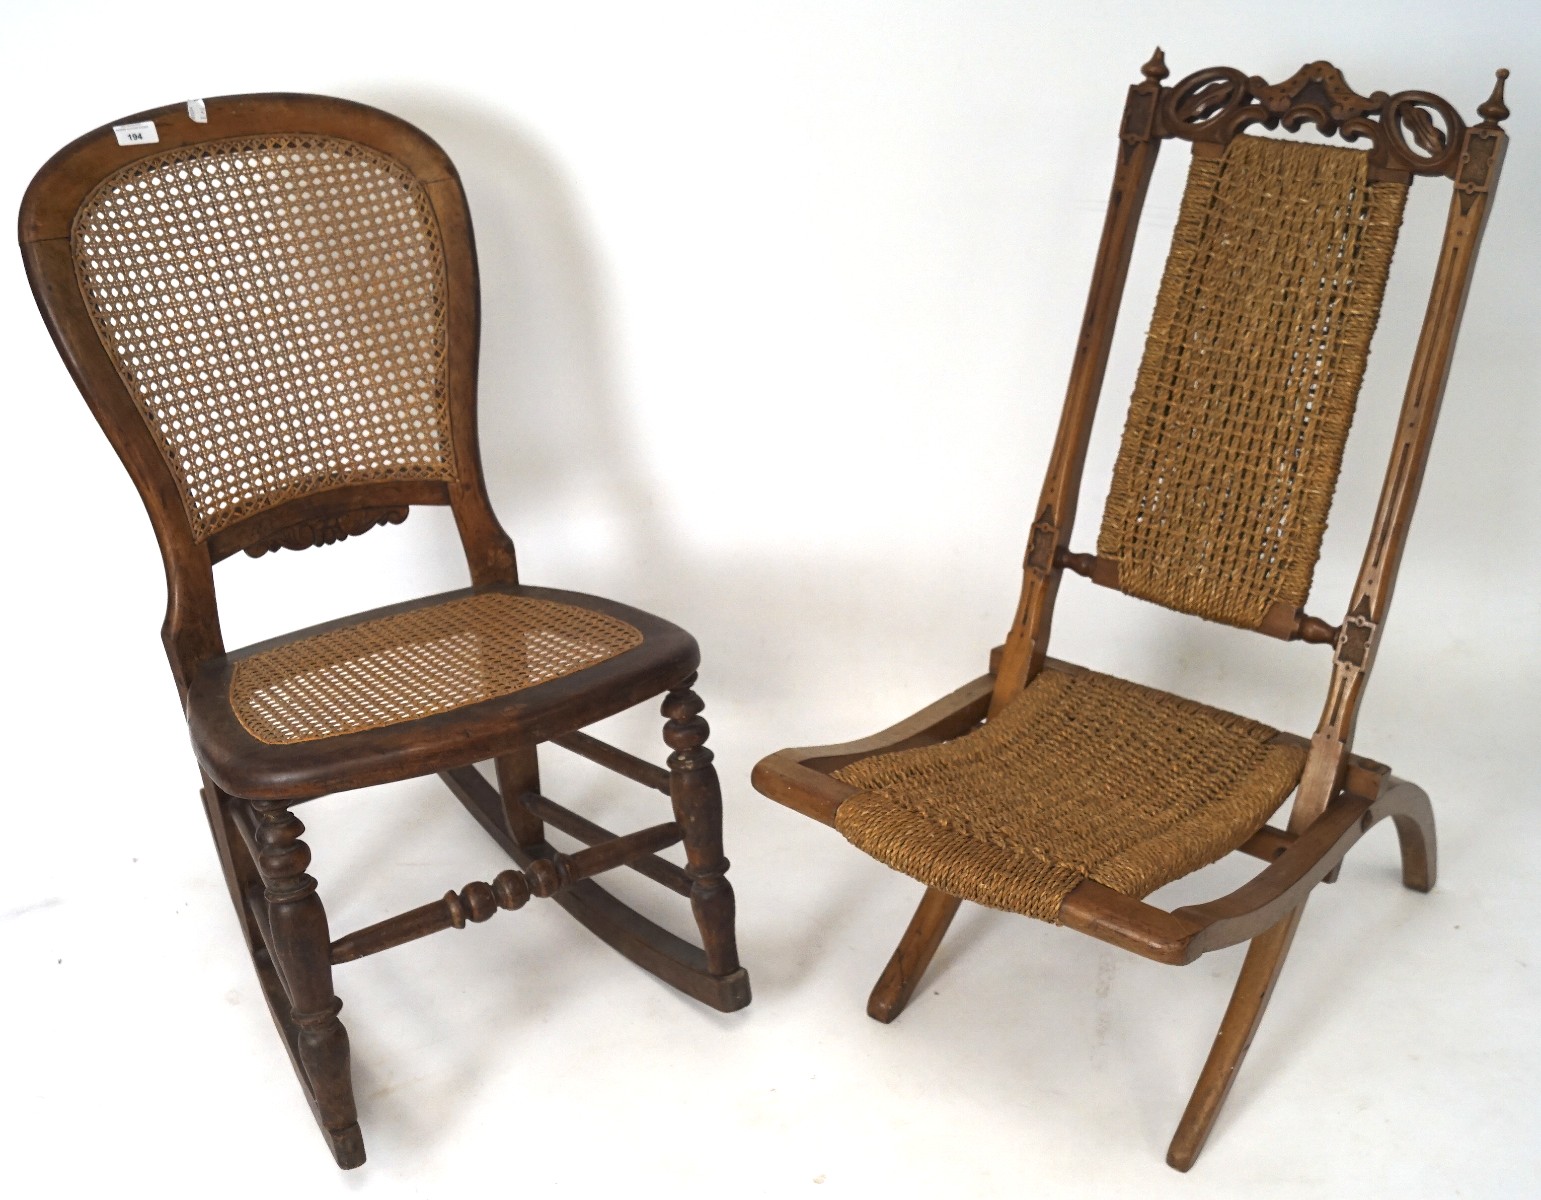 A wooden framed rocking chair and a folding chair, both with wicker details,